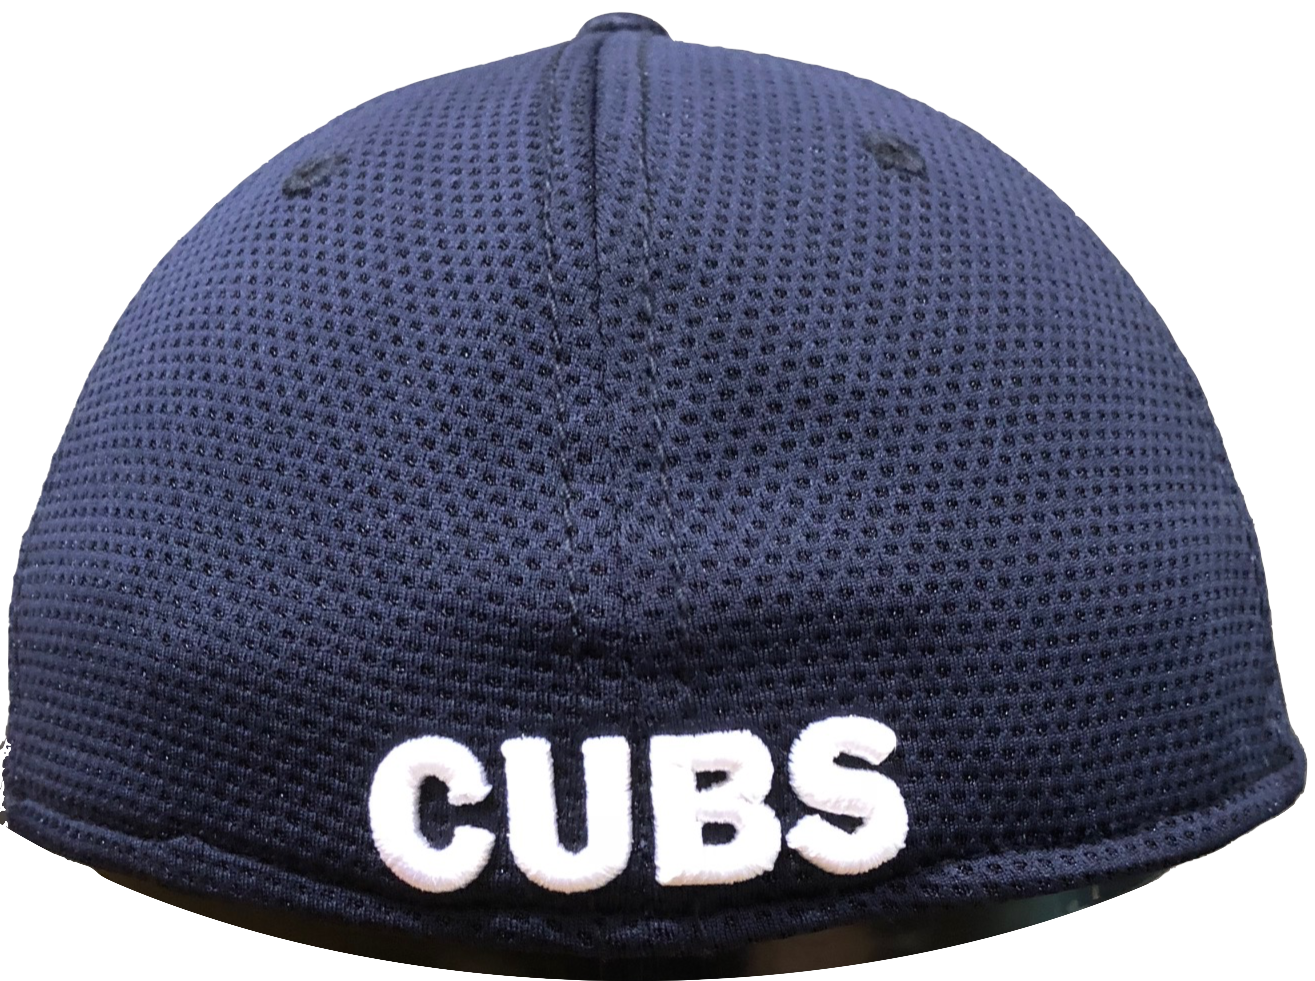 Chicago Cubs New Era Navy Cooperstown Collection Performance 39THIRTY Flex Fit Hat